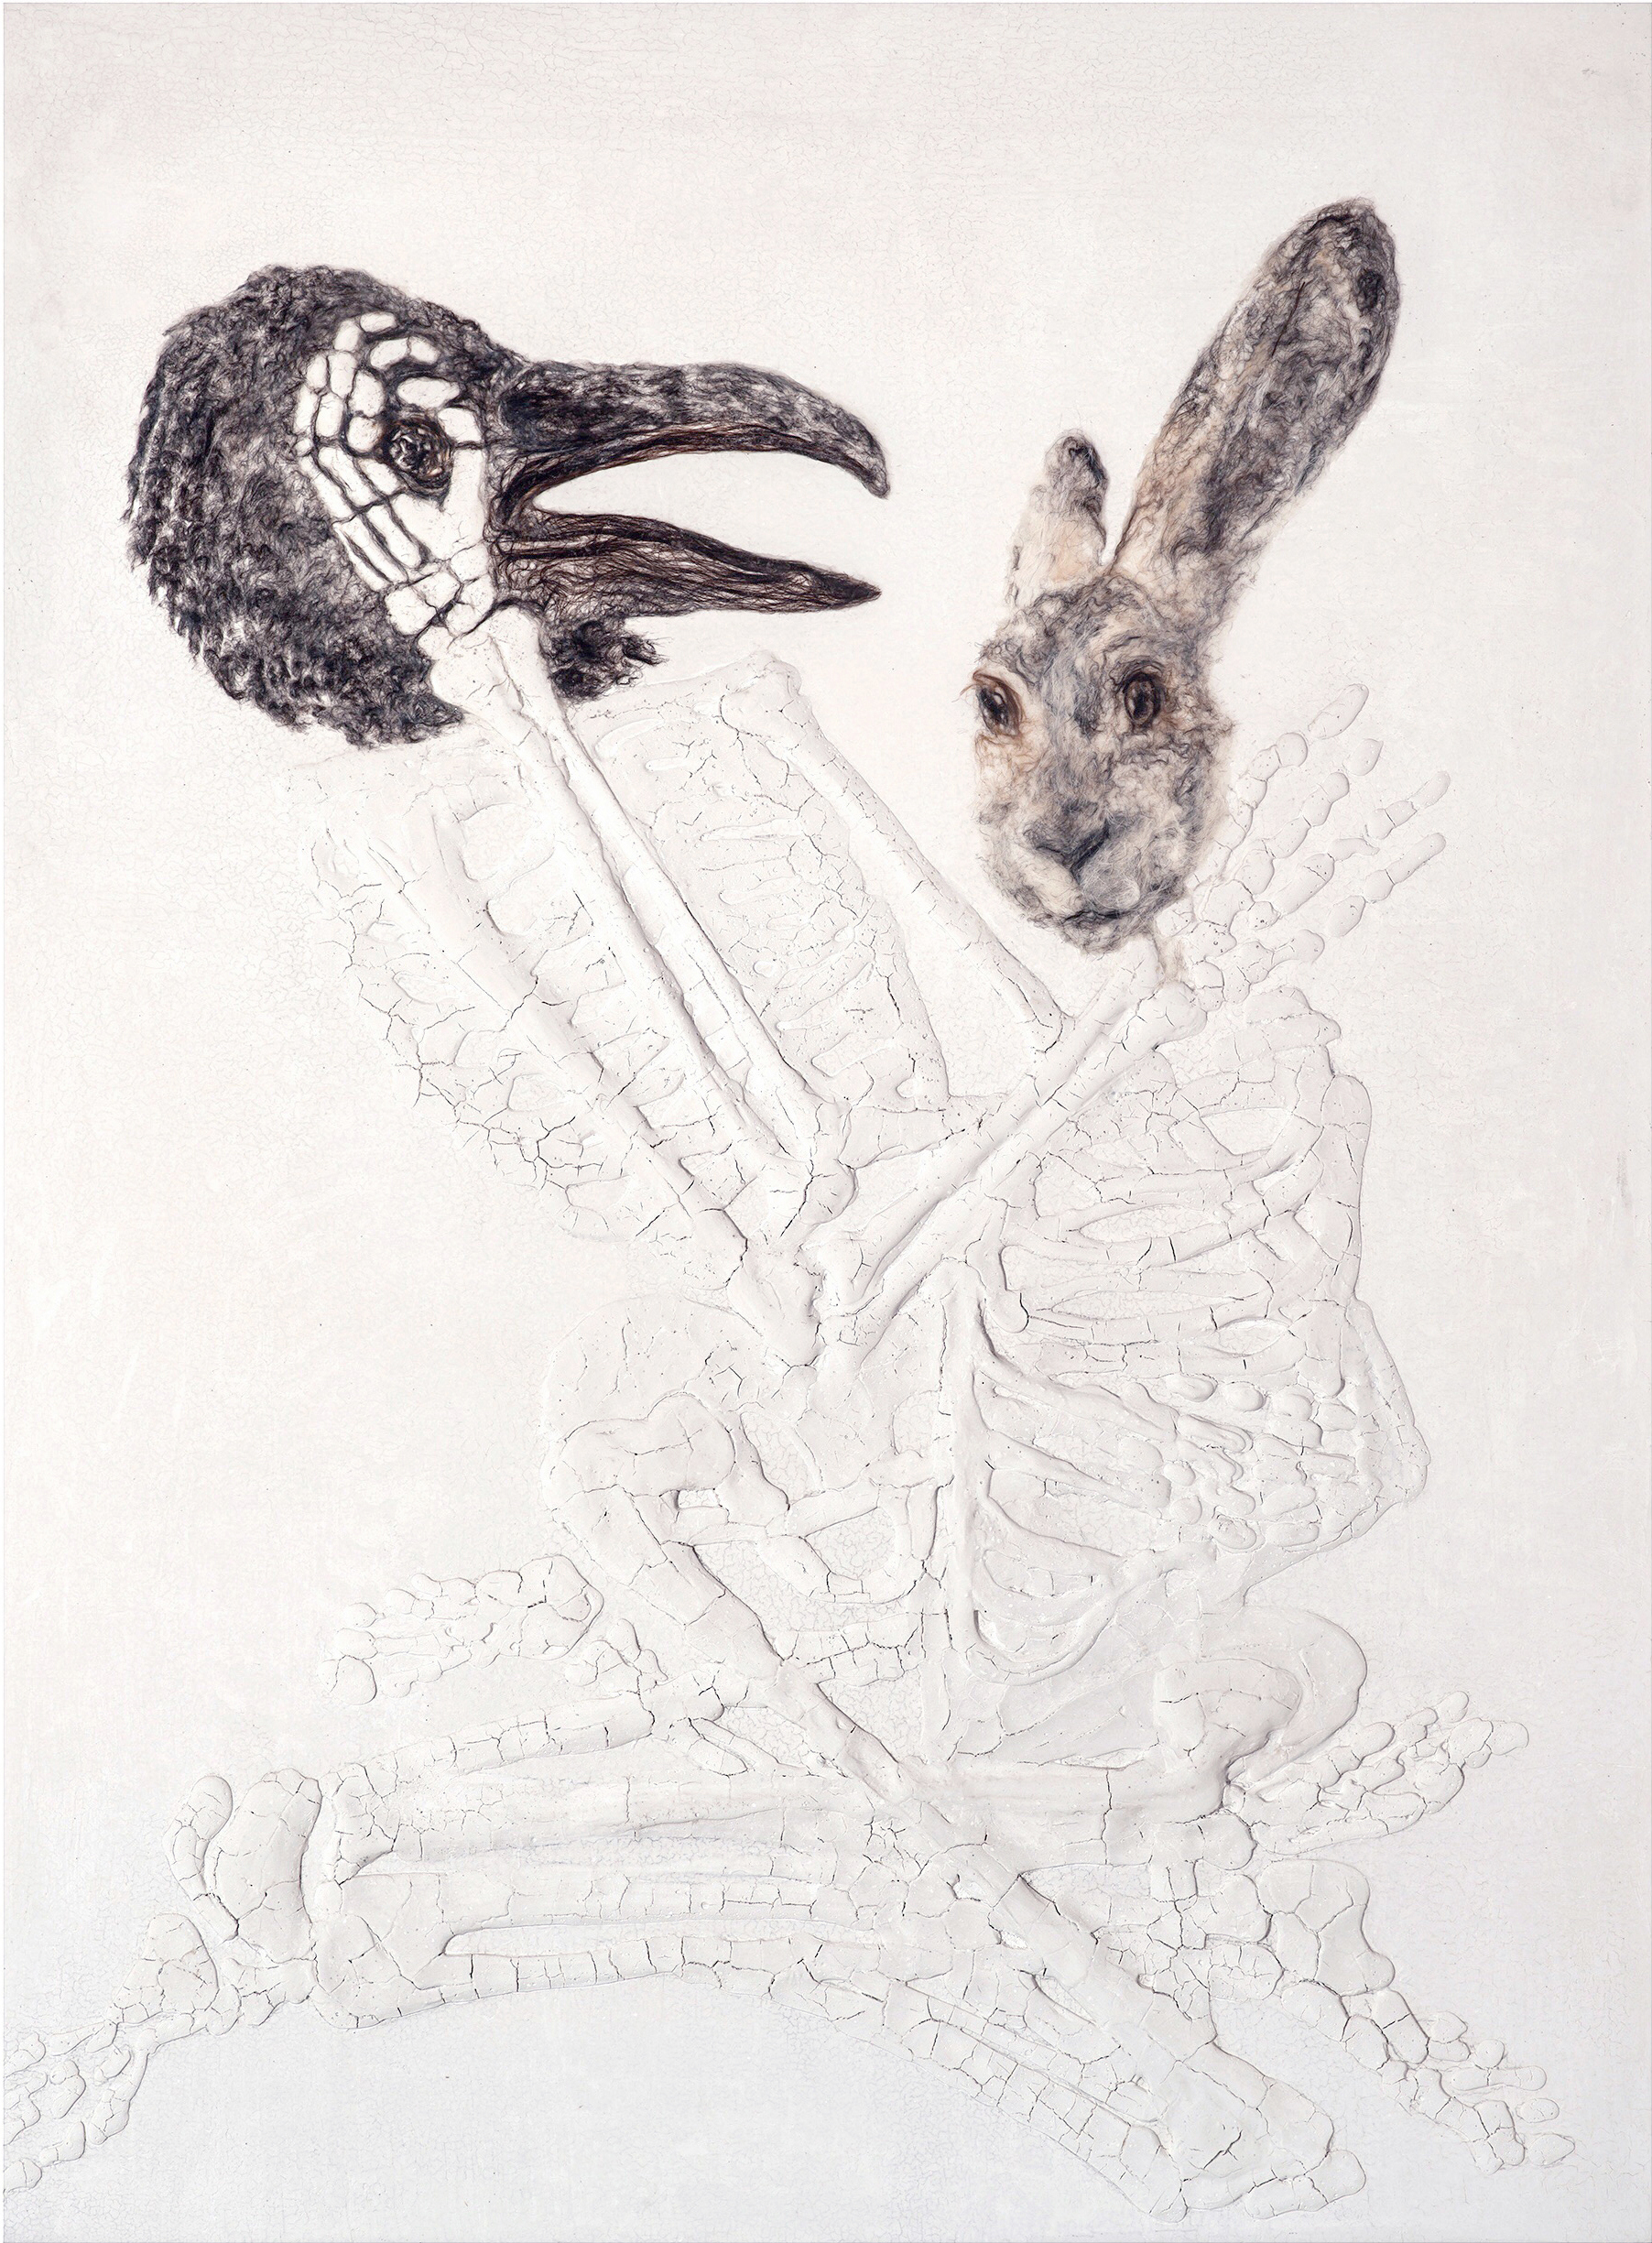 A drawing of an animal and bird with a rabbit.